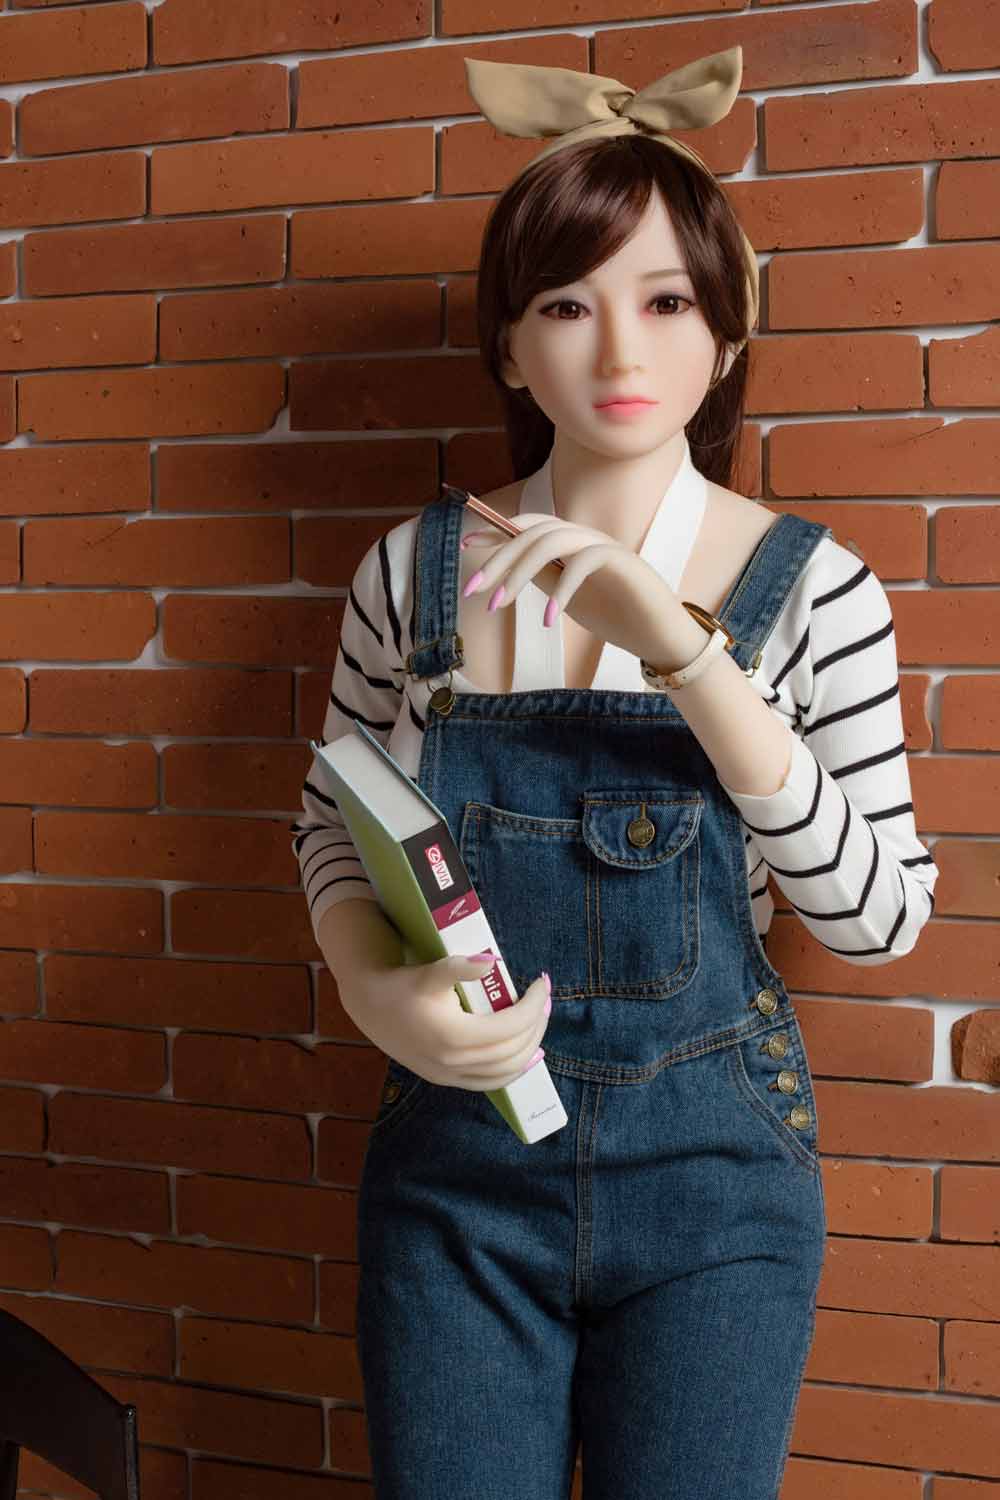 Sex doll with a book in one hand and a pen in one hand